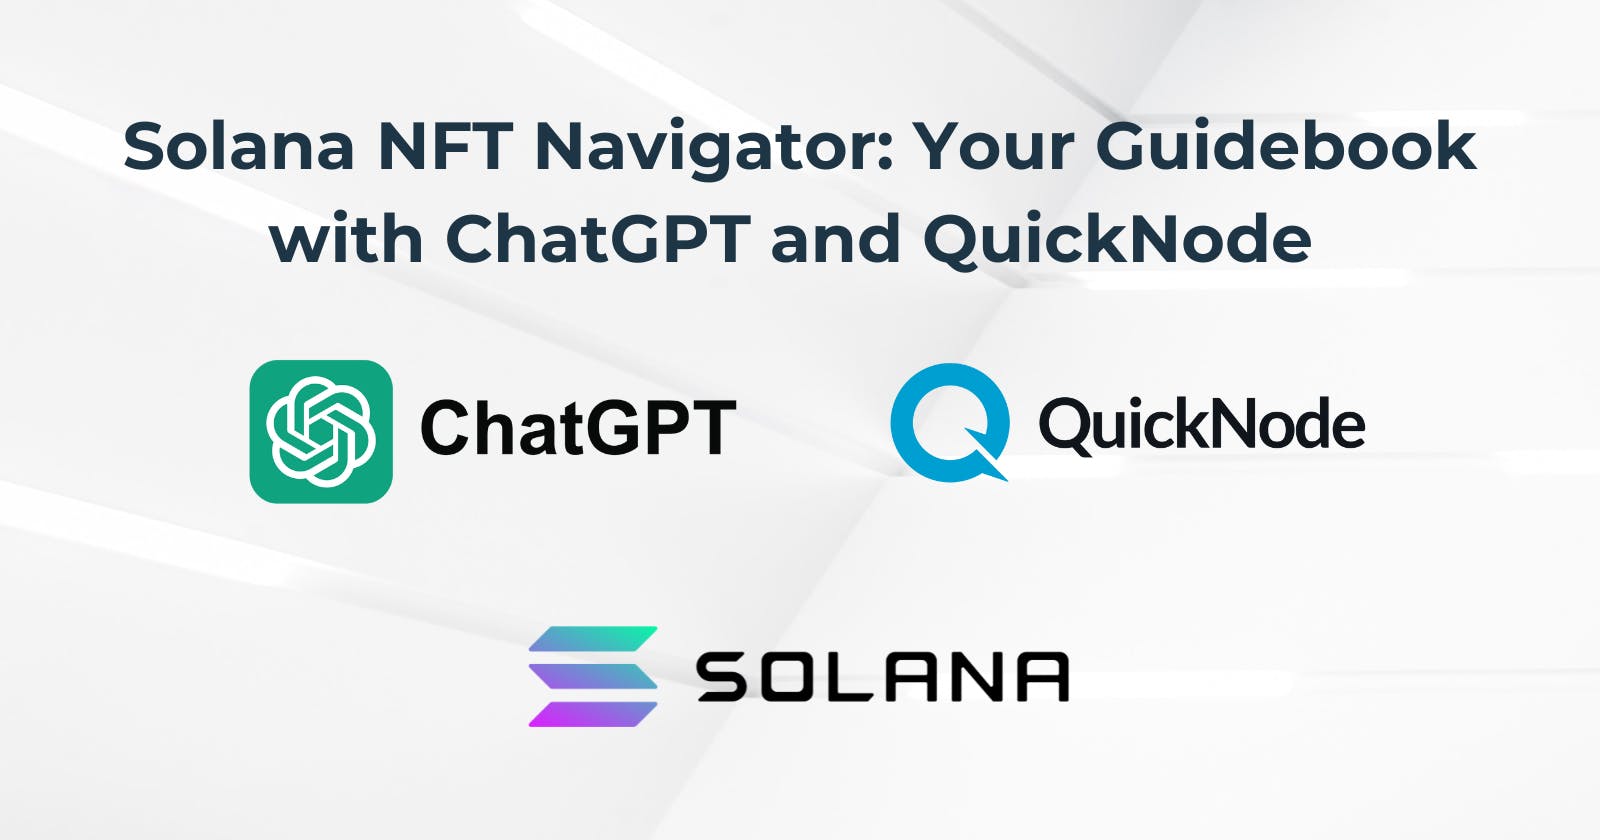 Solana NFT Navigator: Your Guidebook with ChatGPT and QuickNode